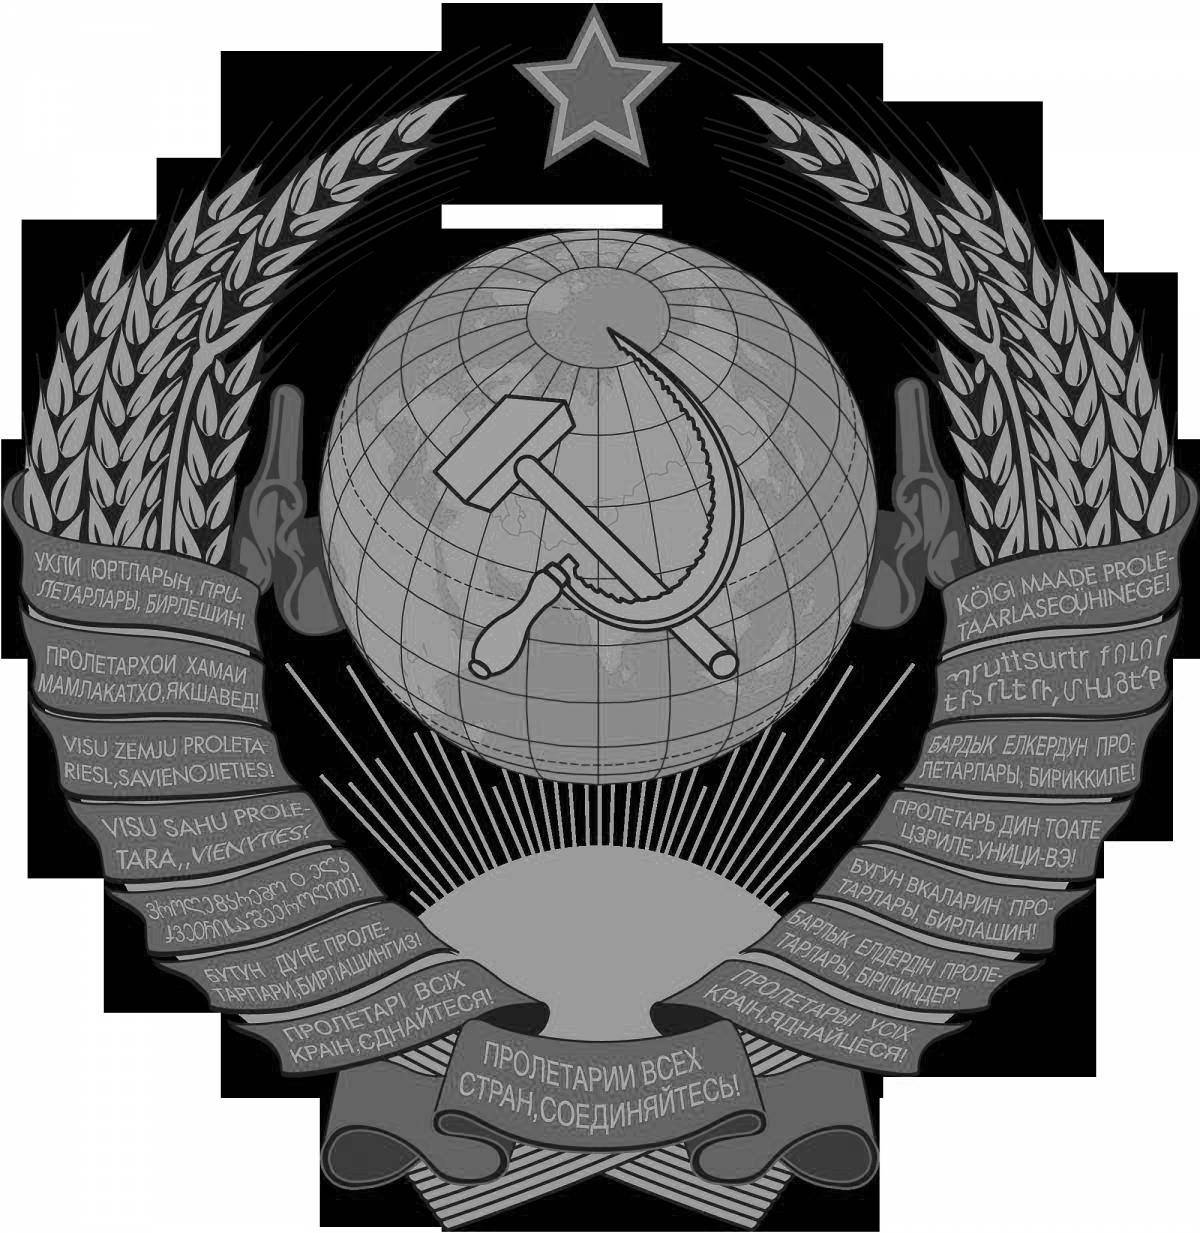 Coloring coat of arms of the soviet union